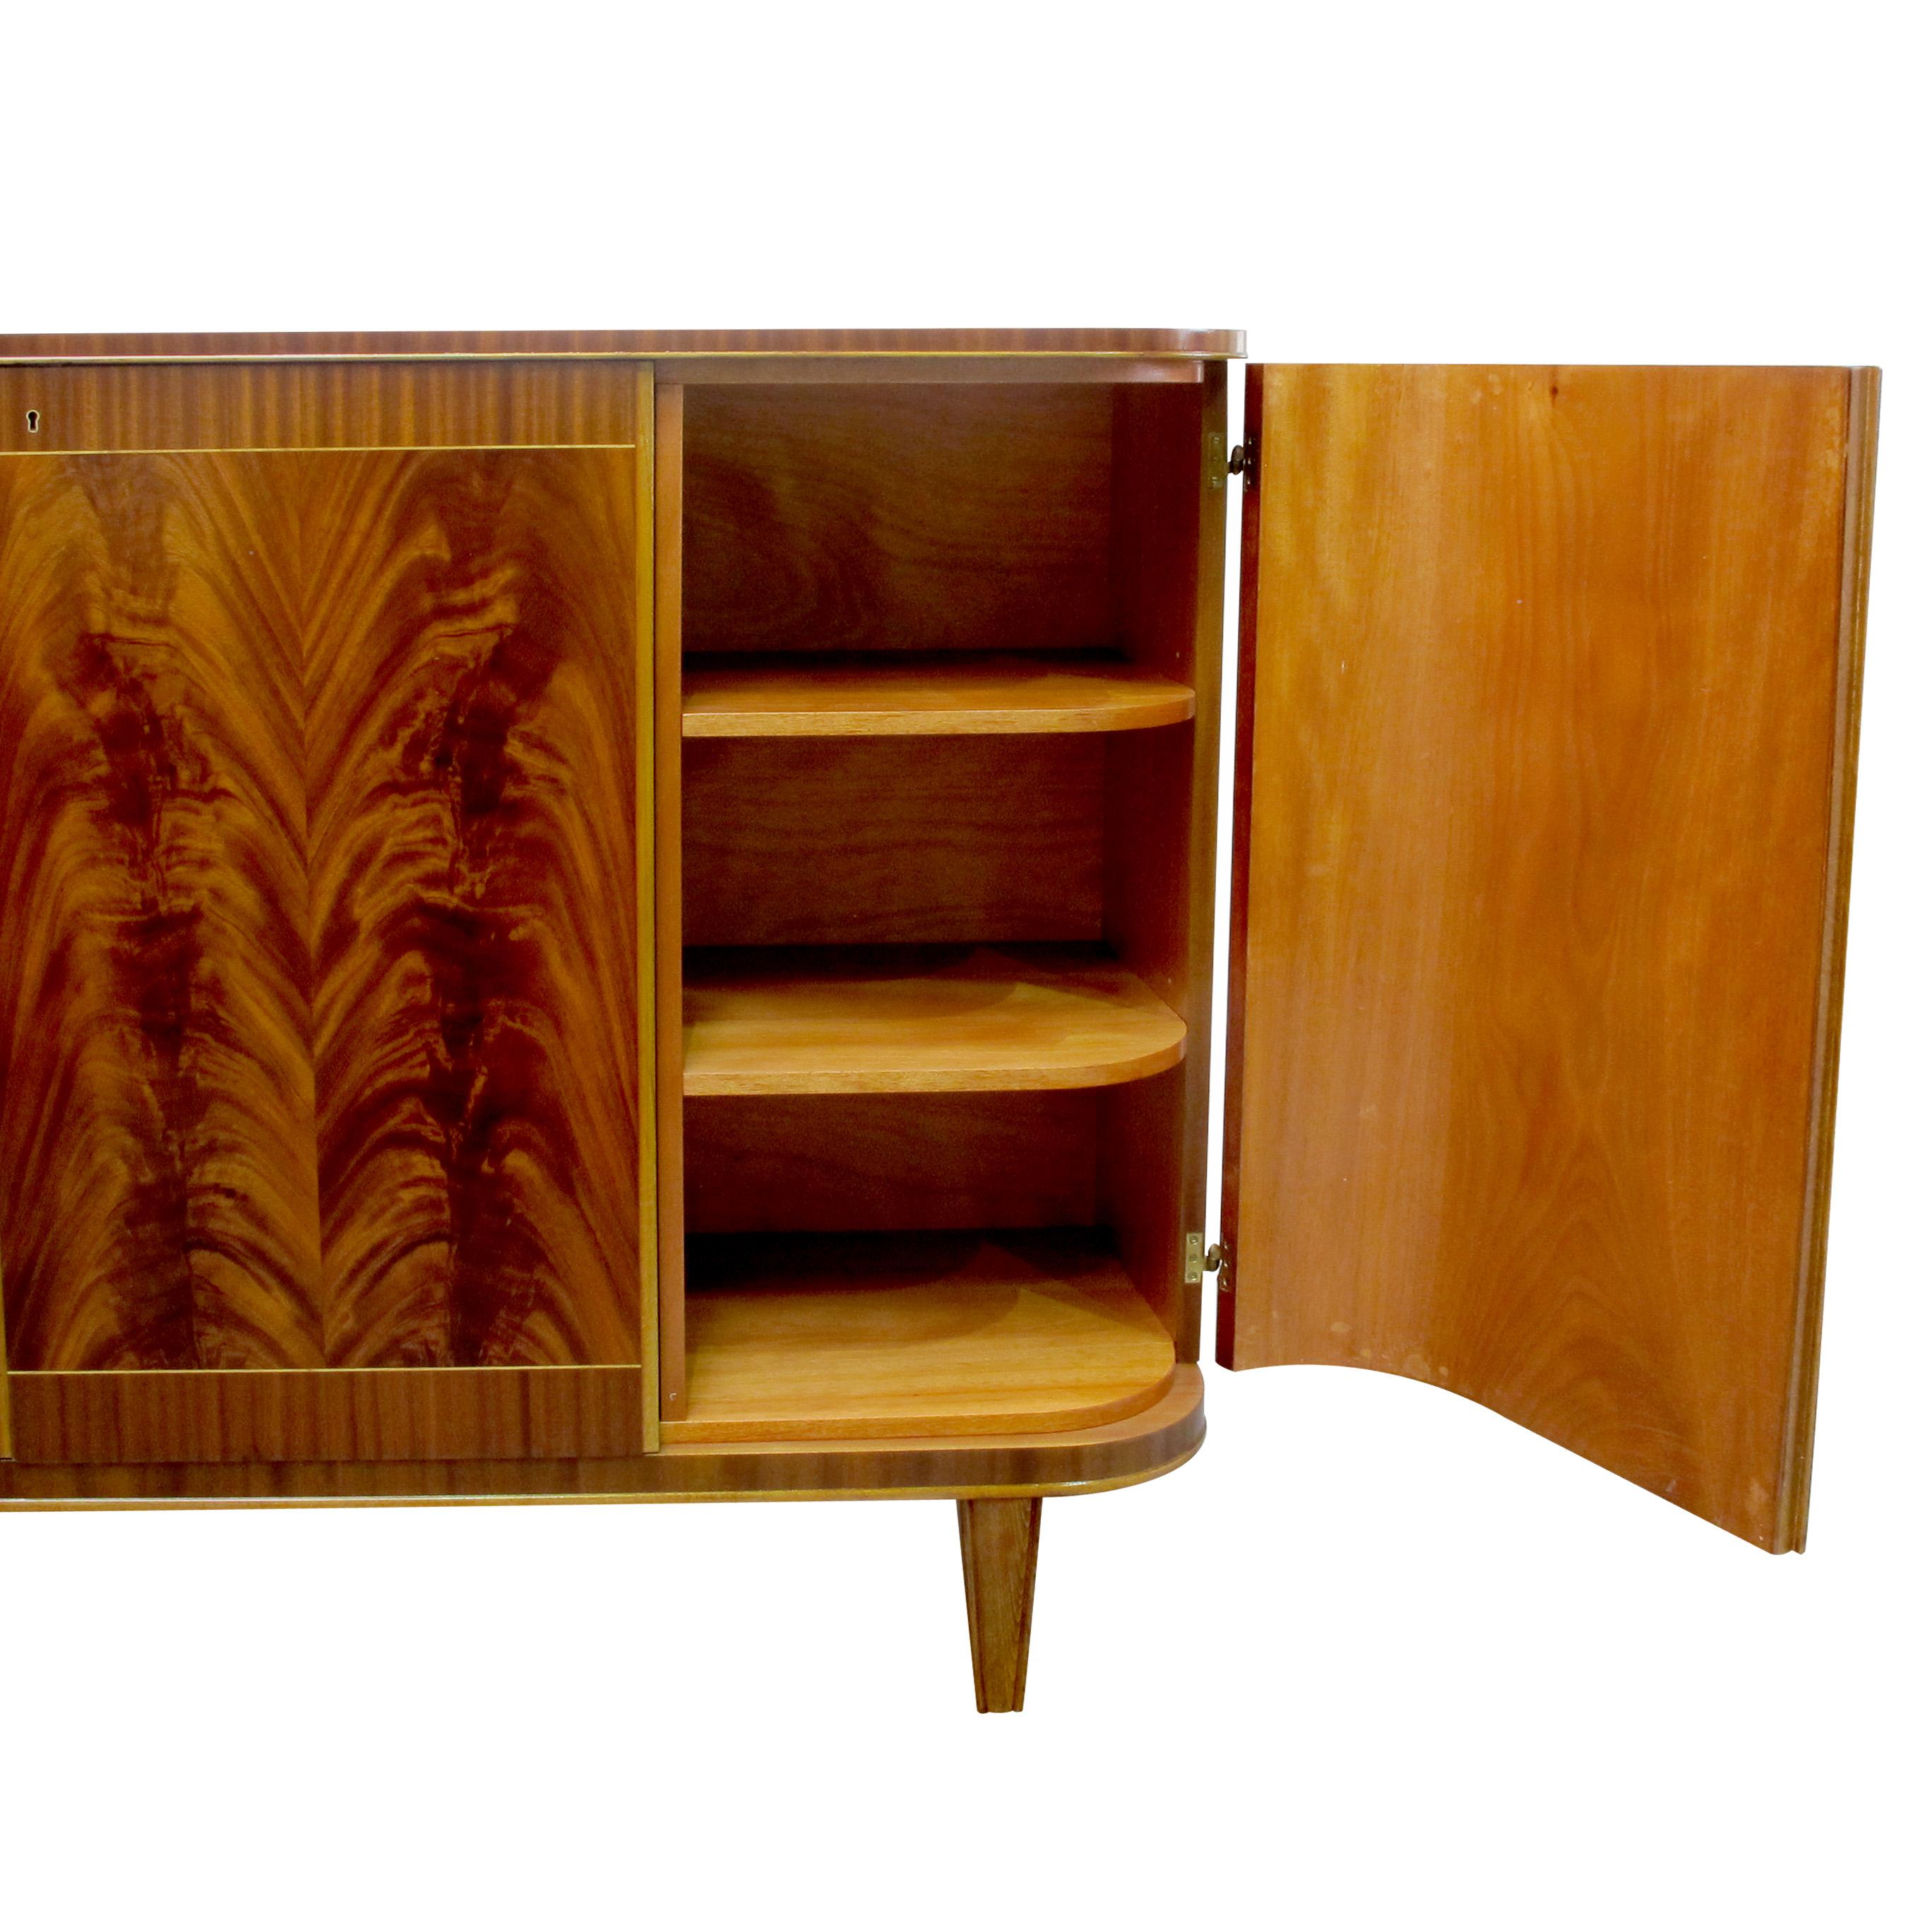 1940s Large Swedish Cabinet-Credenza with Mahogany Flame Veneers For Sale 4